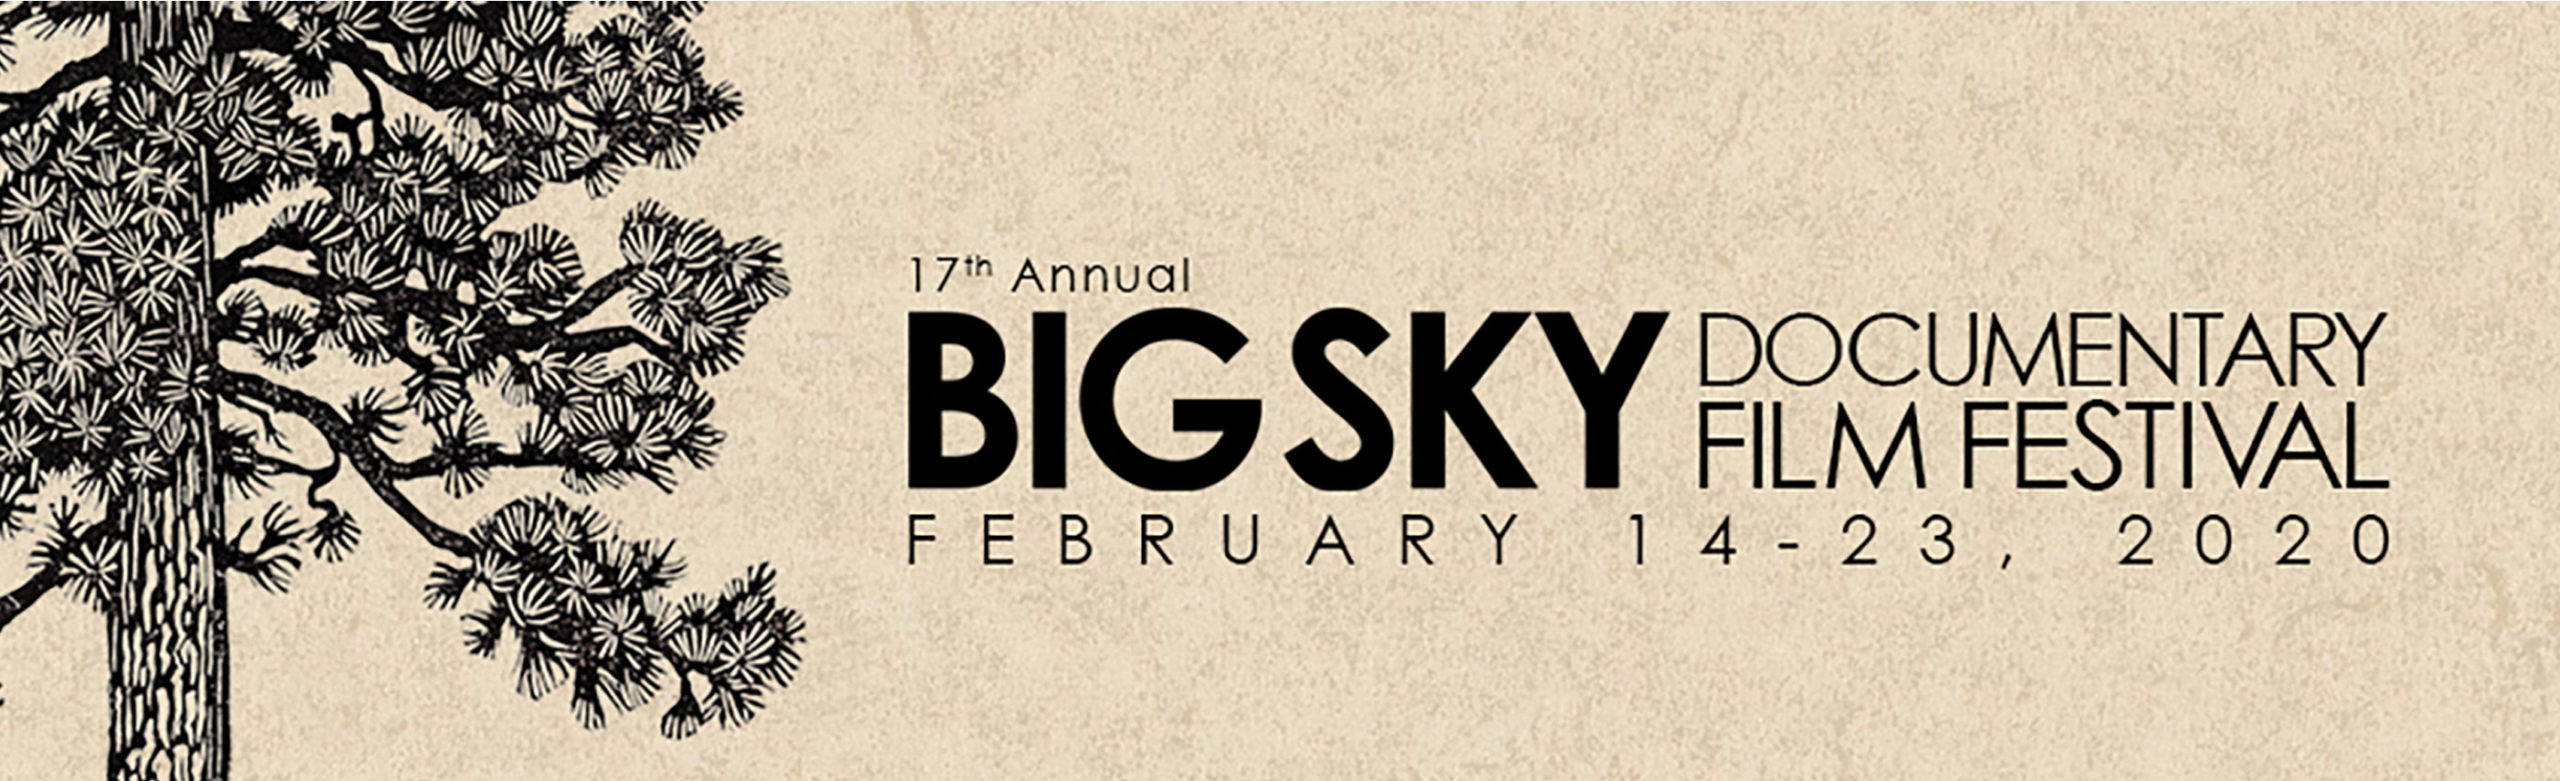 17th Annual Big Sky Documentary Film Festival Schedule Released Image